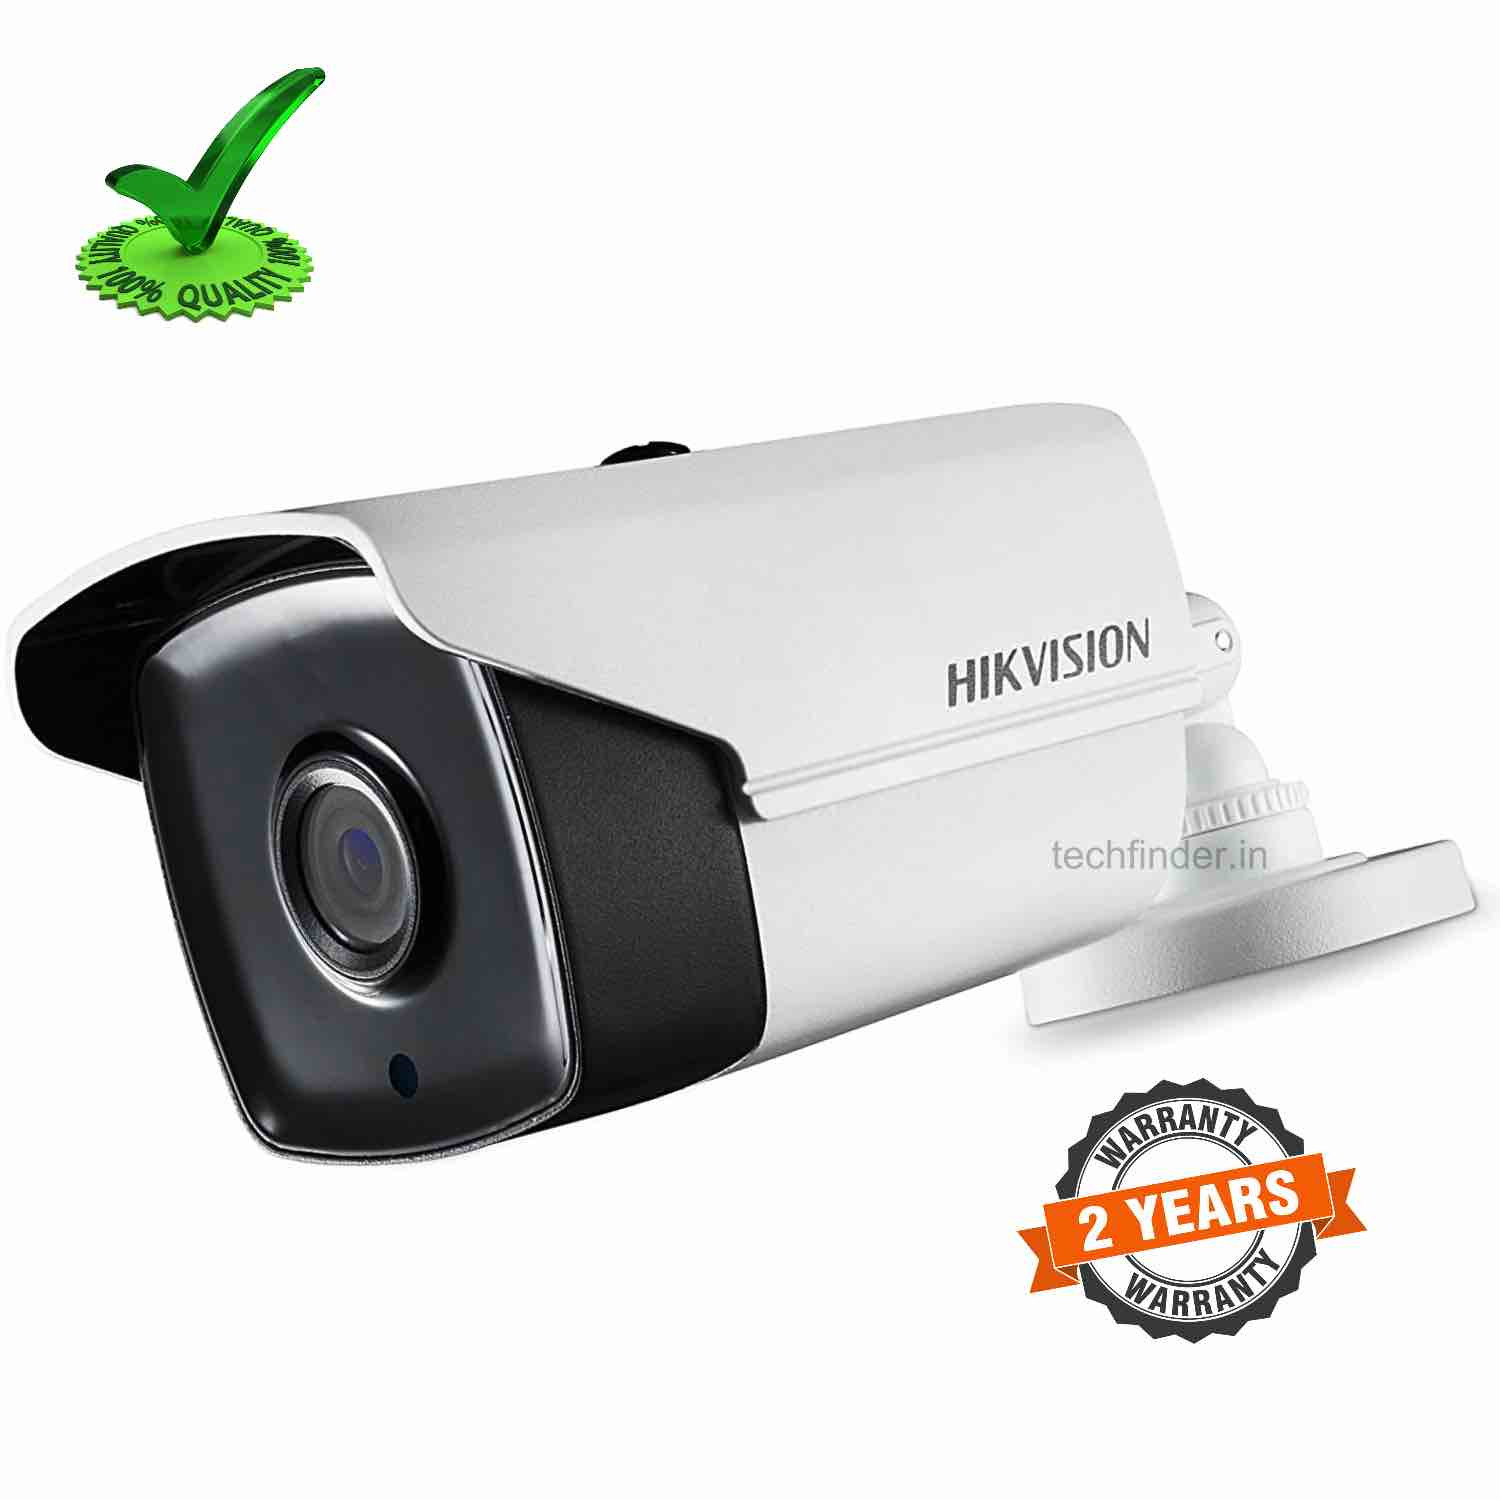  Hikvision DS 2CE16H0T ITPF 5mp HD Bullet Camera